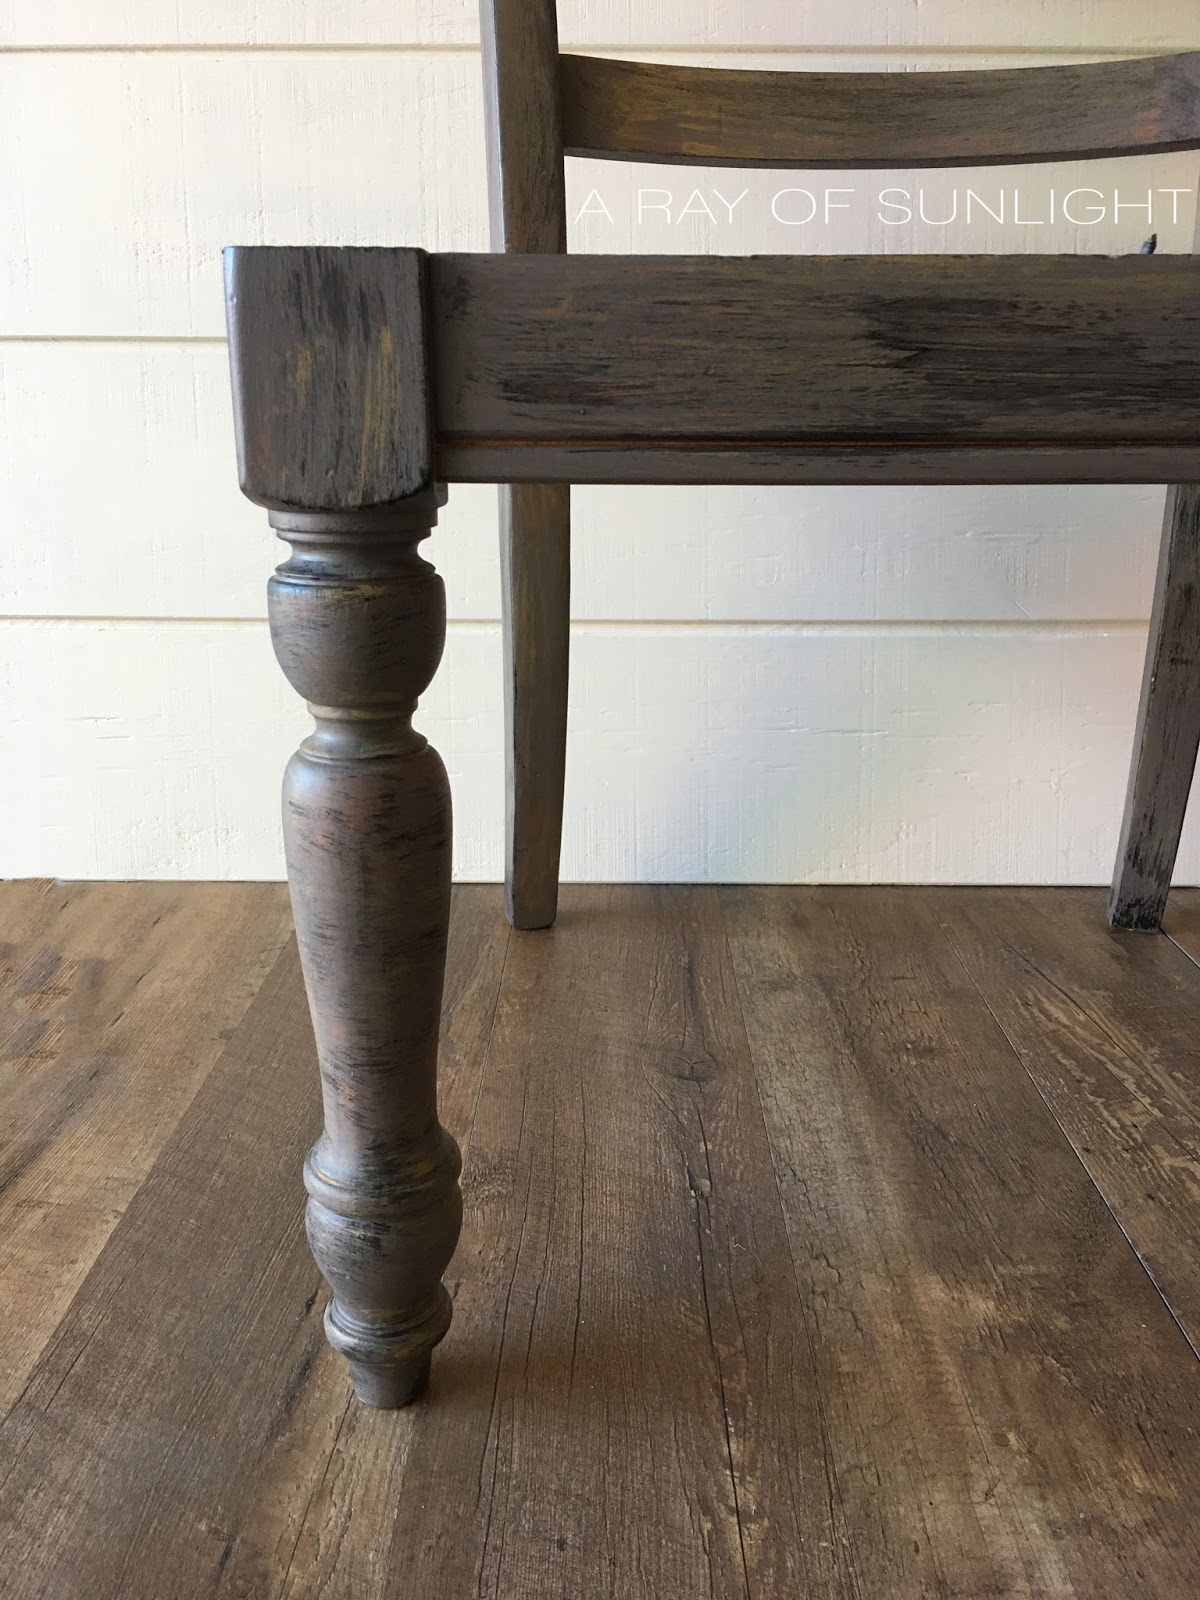 Transform Dining Chairs with Chalk Paint to get a Restoration Hardware Weathered Faux finish by arayofsunlight.com